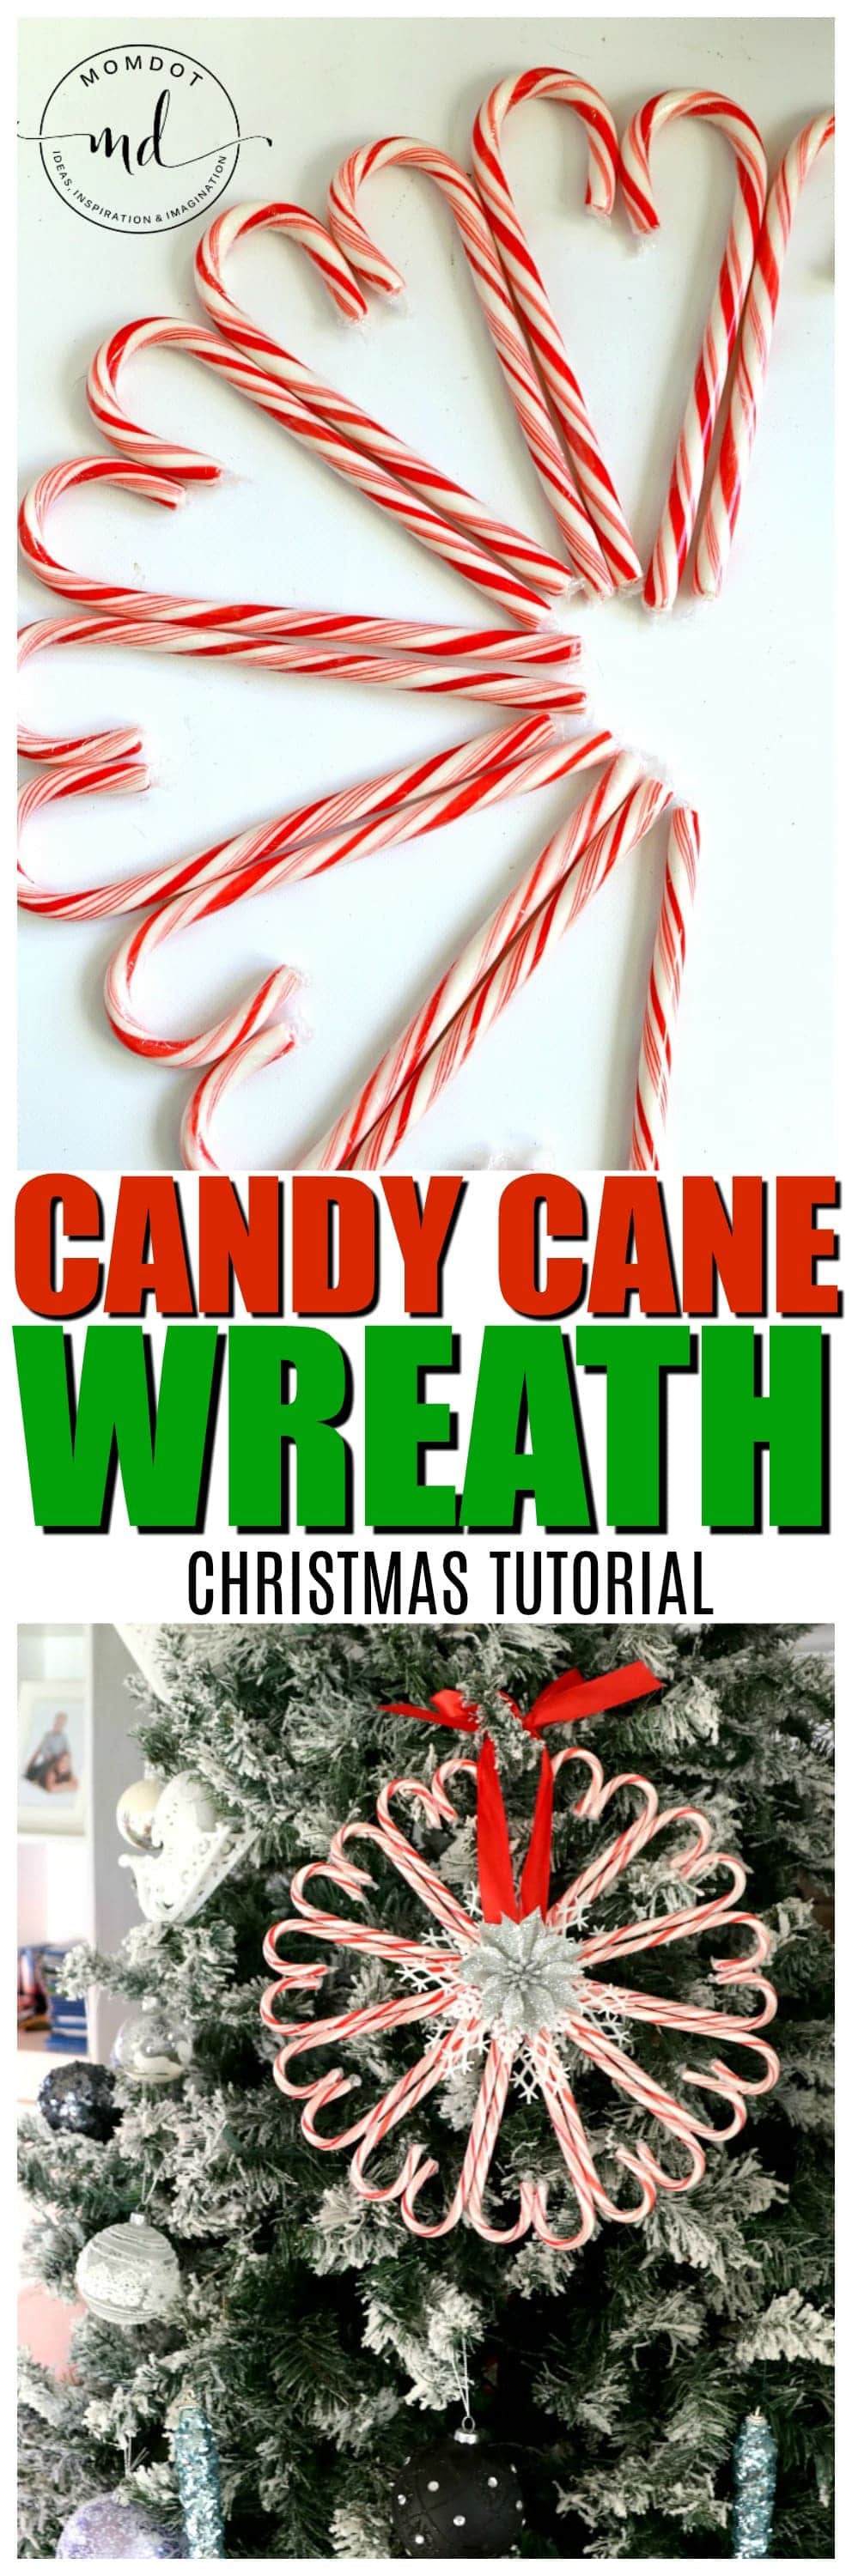 Candy Cane Wreath Tutorial | Candy Cane DIY with Step by Step instructions for this awesome and inexpensive Christmas Craft